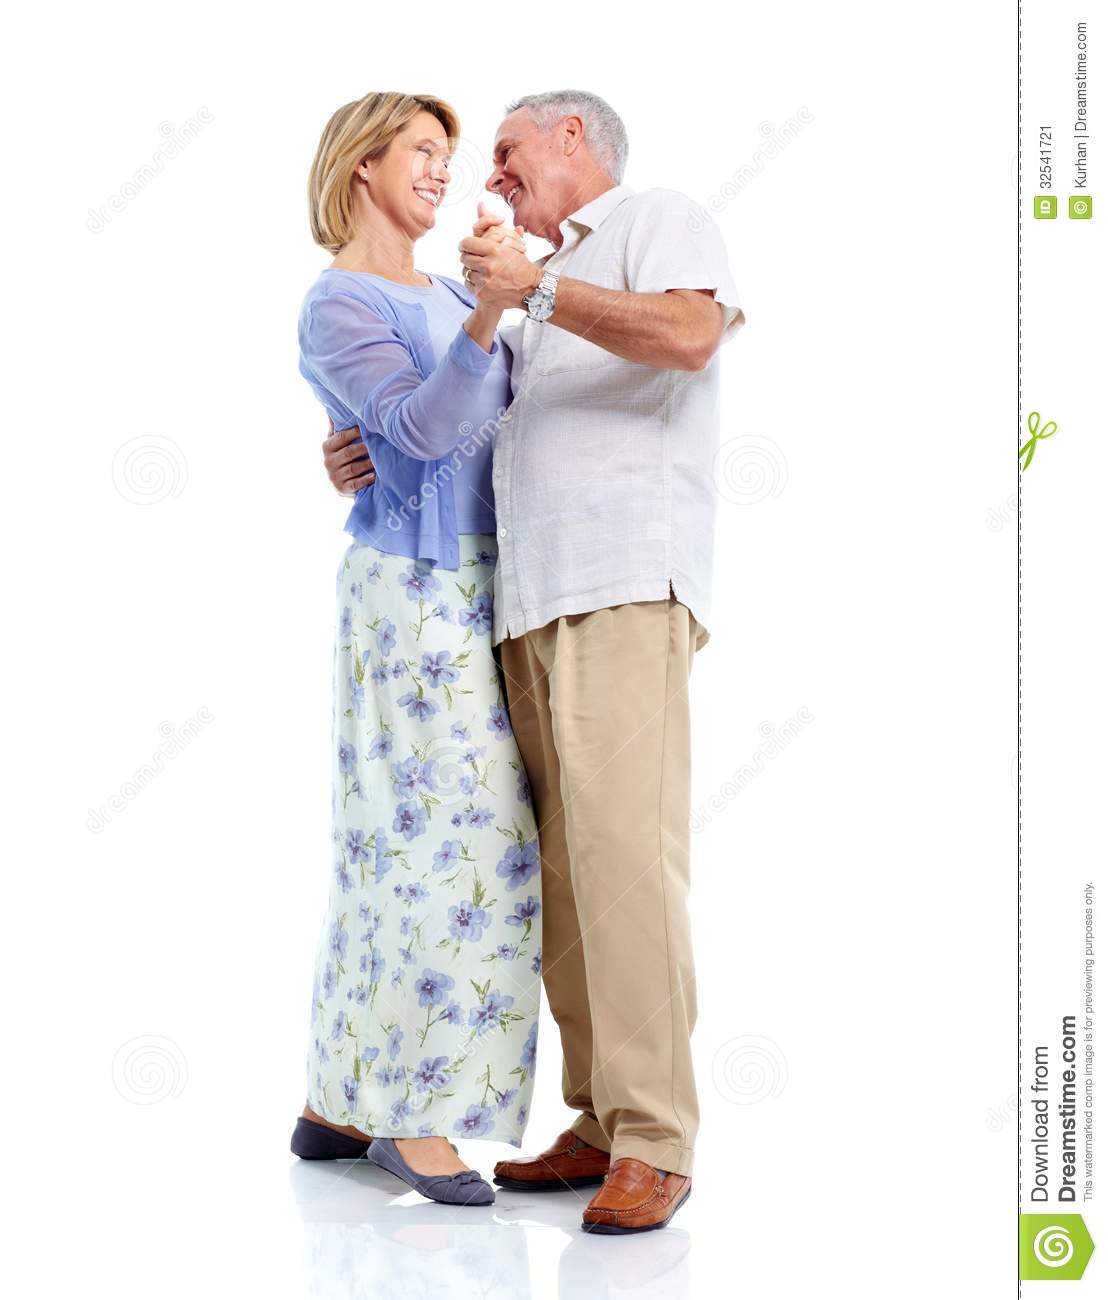 Happy Dancing Senior Couple In Love  Isolated On White Background